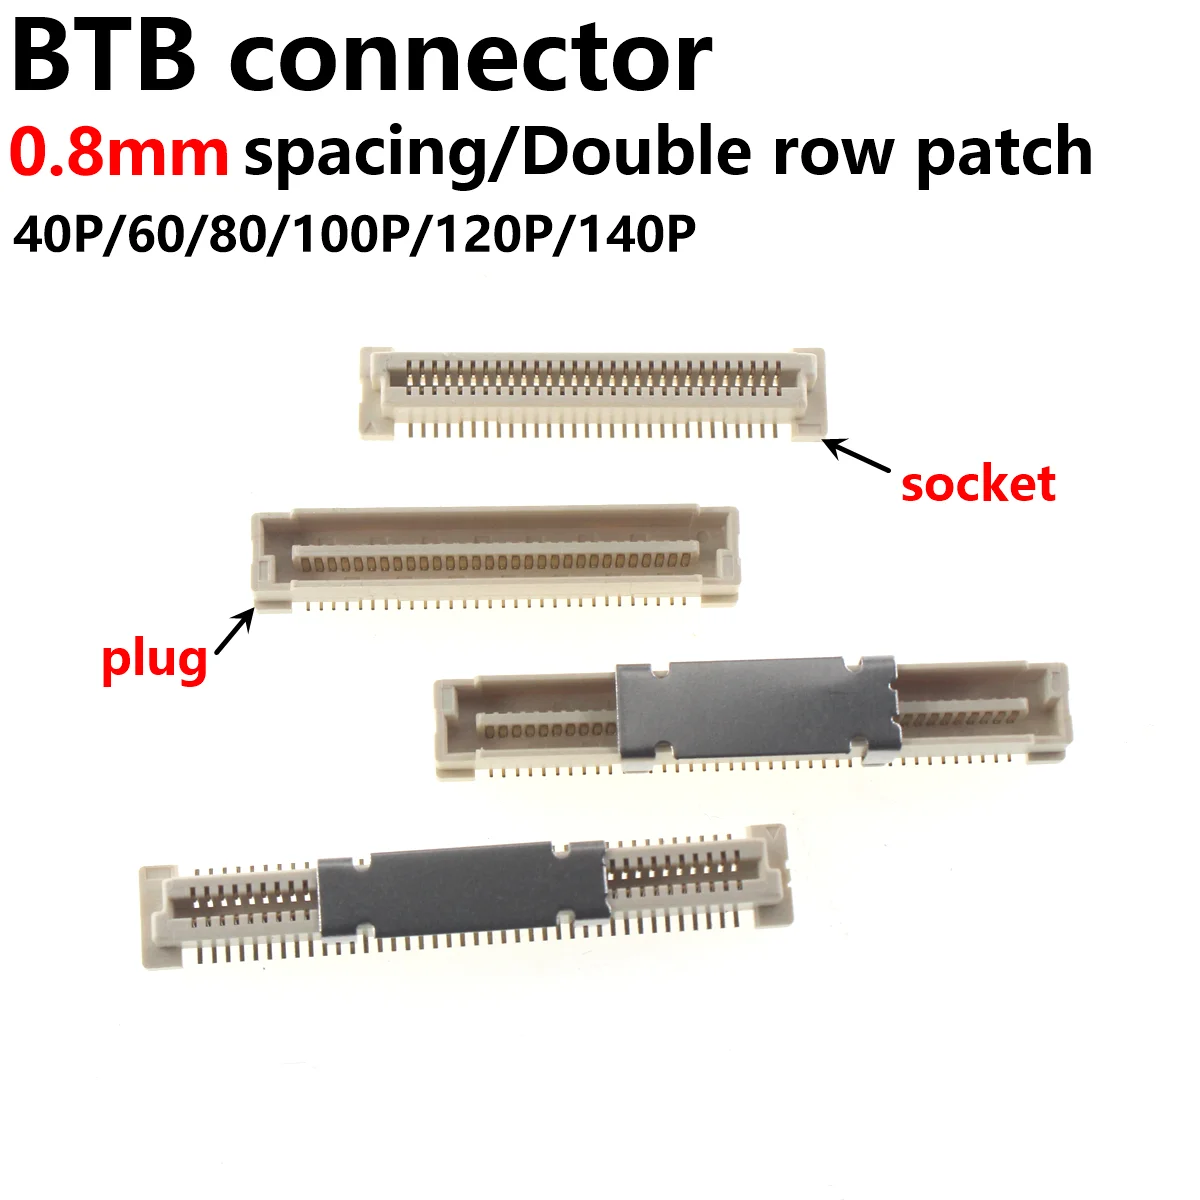 2SETS SOCKET AND PLUG 1SETS 0.8mm pitch board to double row patch BTB connector 40P/60/80/100P/120P/140P 1pcs new for jbl pulse 4 nd socket bluetooth speaker bluetooth board usb connector for jbl pulse4 nd